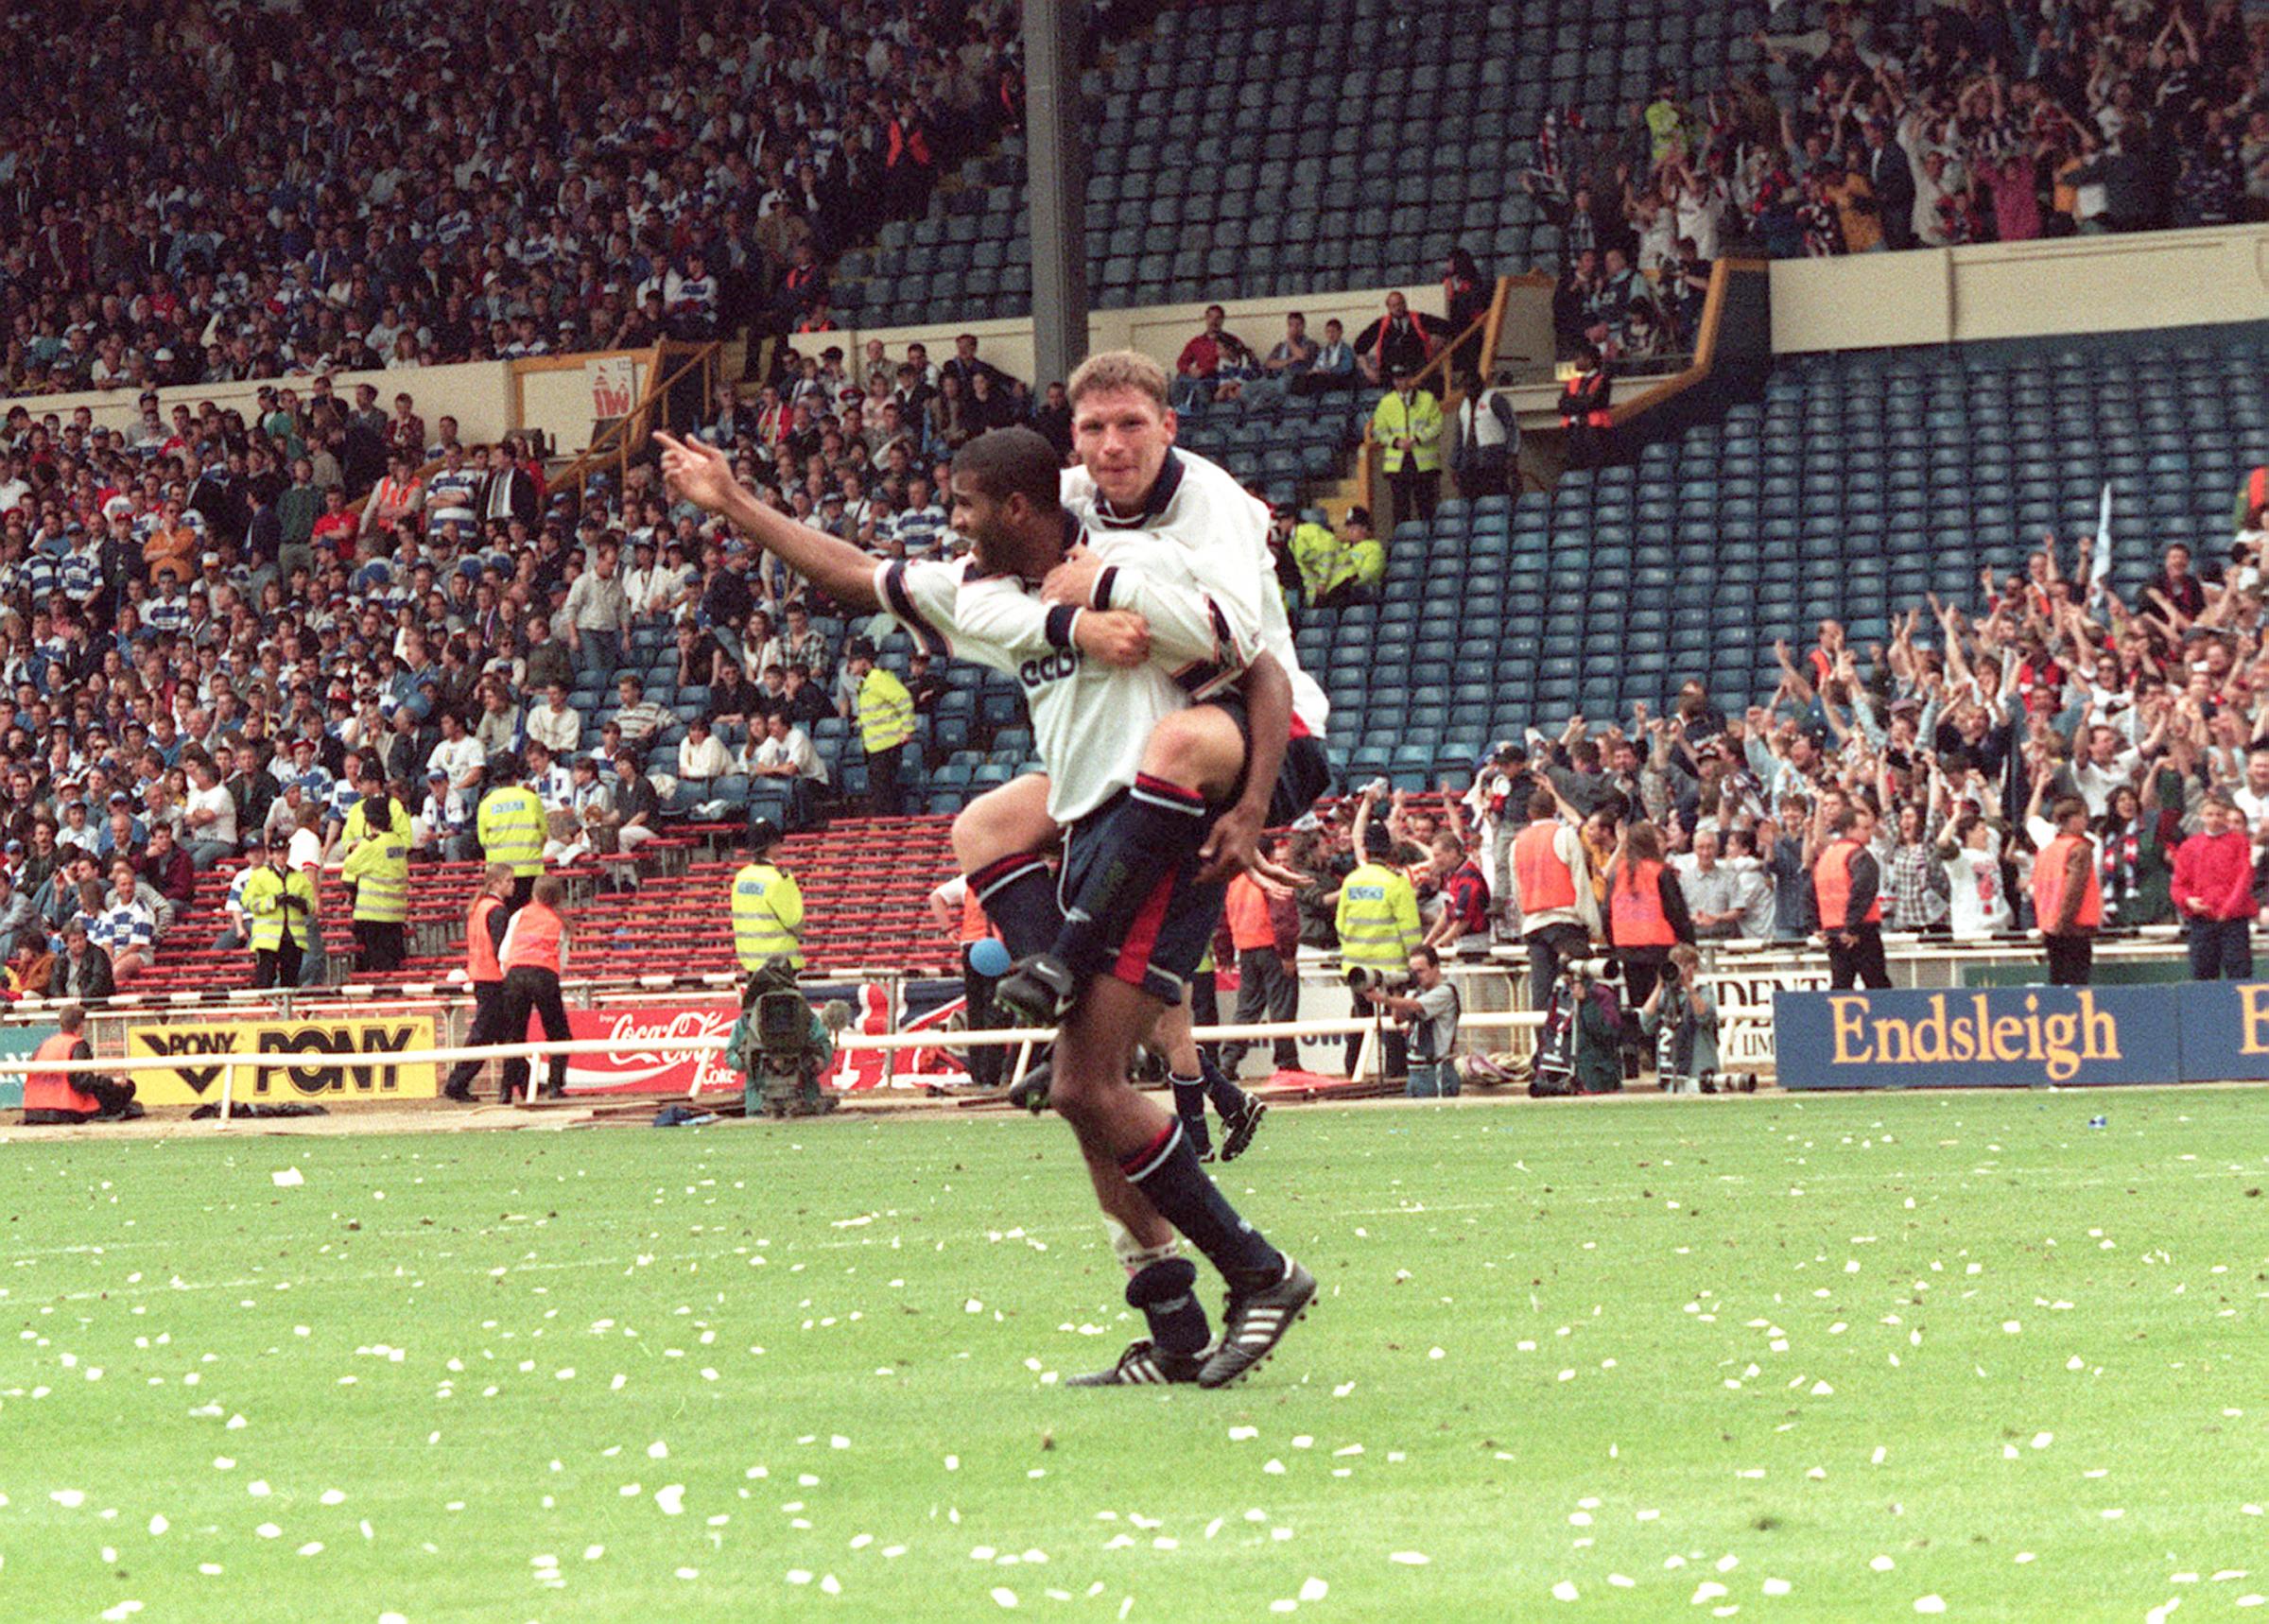 Fabian De Freitas and Alan Thompson at Wembley back in 1995